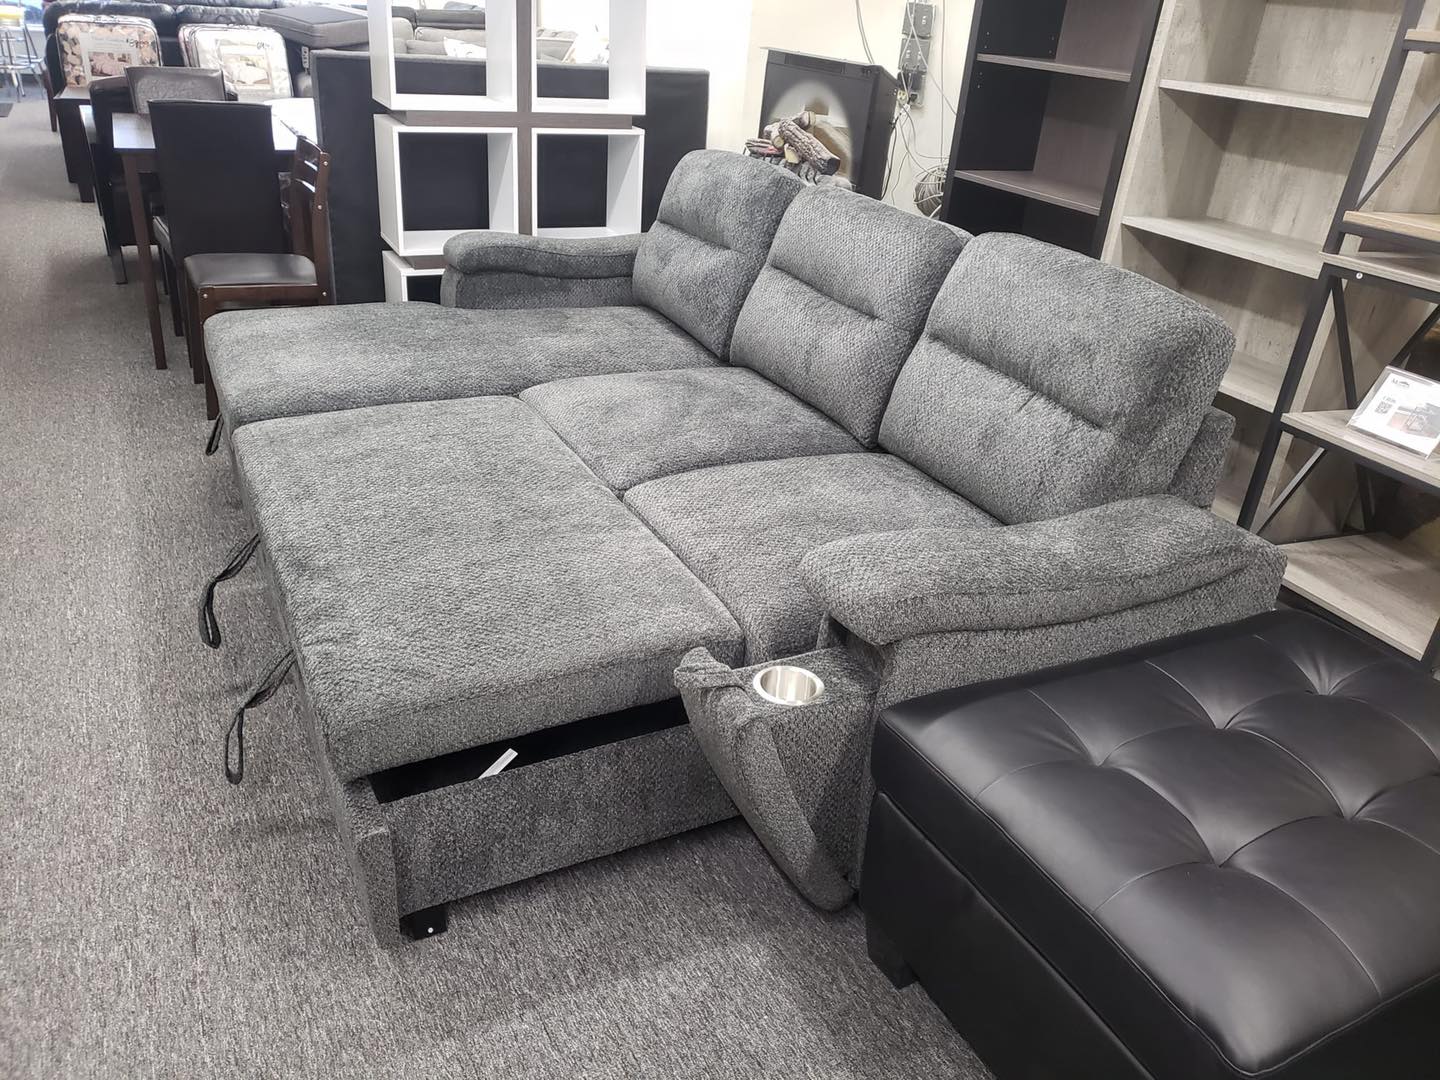 Barstow - Sofa Pull Out Bed with 2 Hidden Cupholders and Reversible Storage Chaise in Charcoal